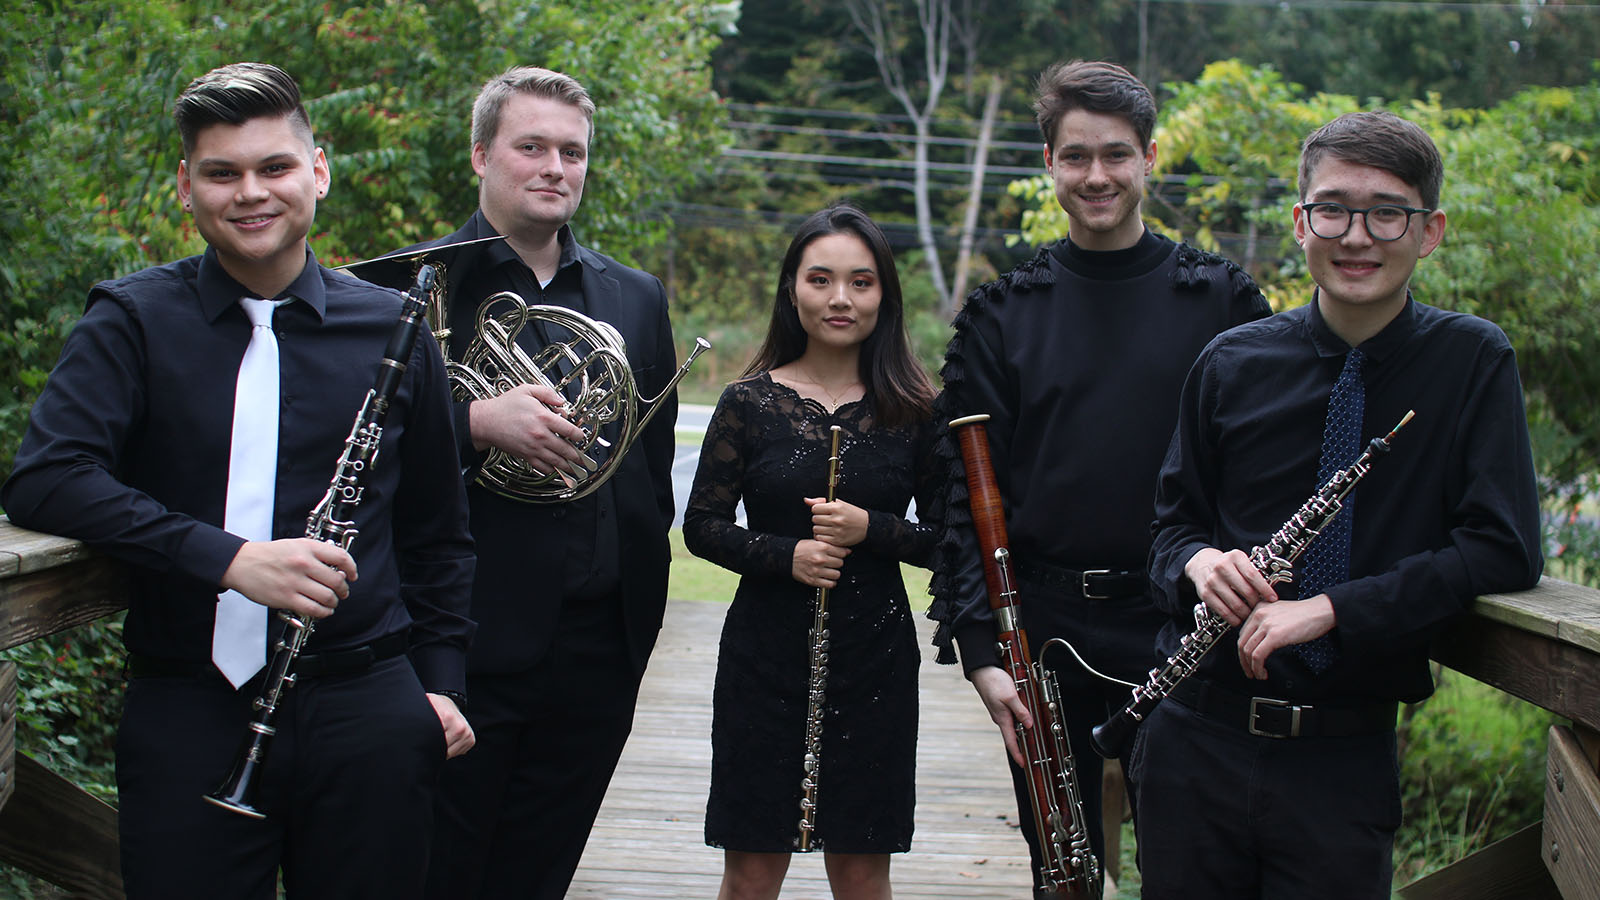 Members of Ignis, the graduate fellowship woodwind quintet.